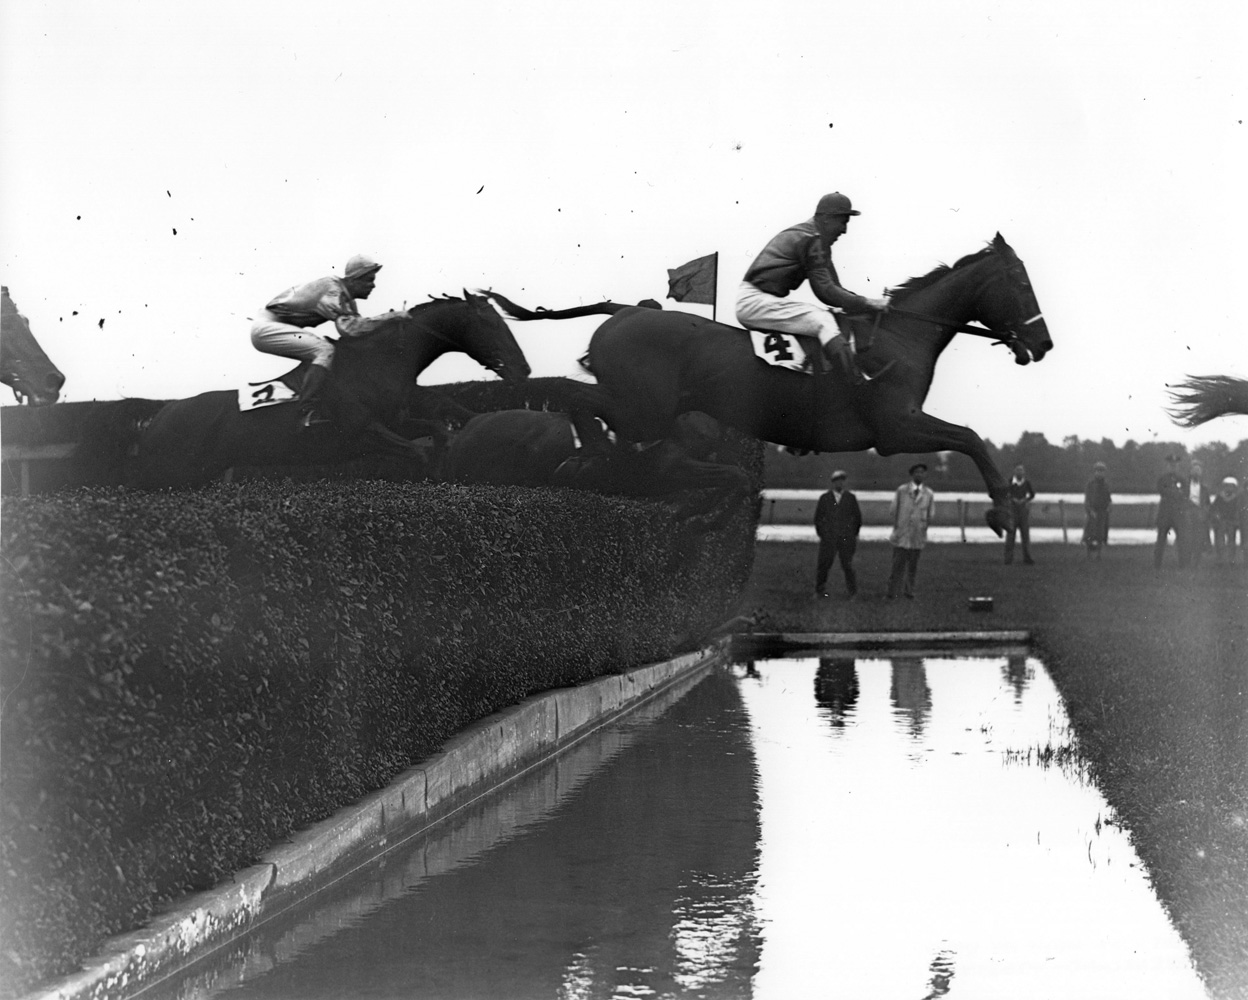 Battleship (Carroll K. Bassett up) clearing a water jump in the American Grand National Steeplechase at Belmont Park (Keeneland Library Morgan Collection/Museum Collection)